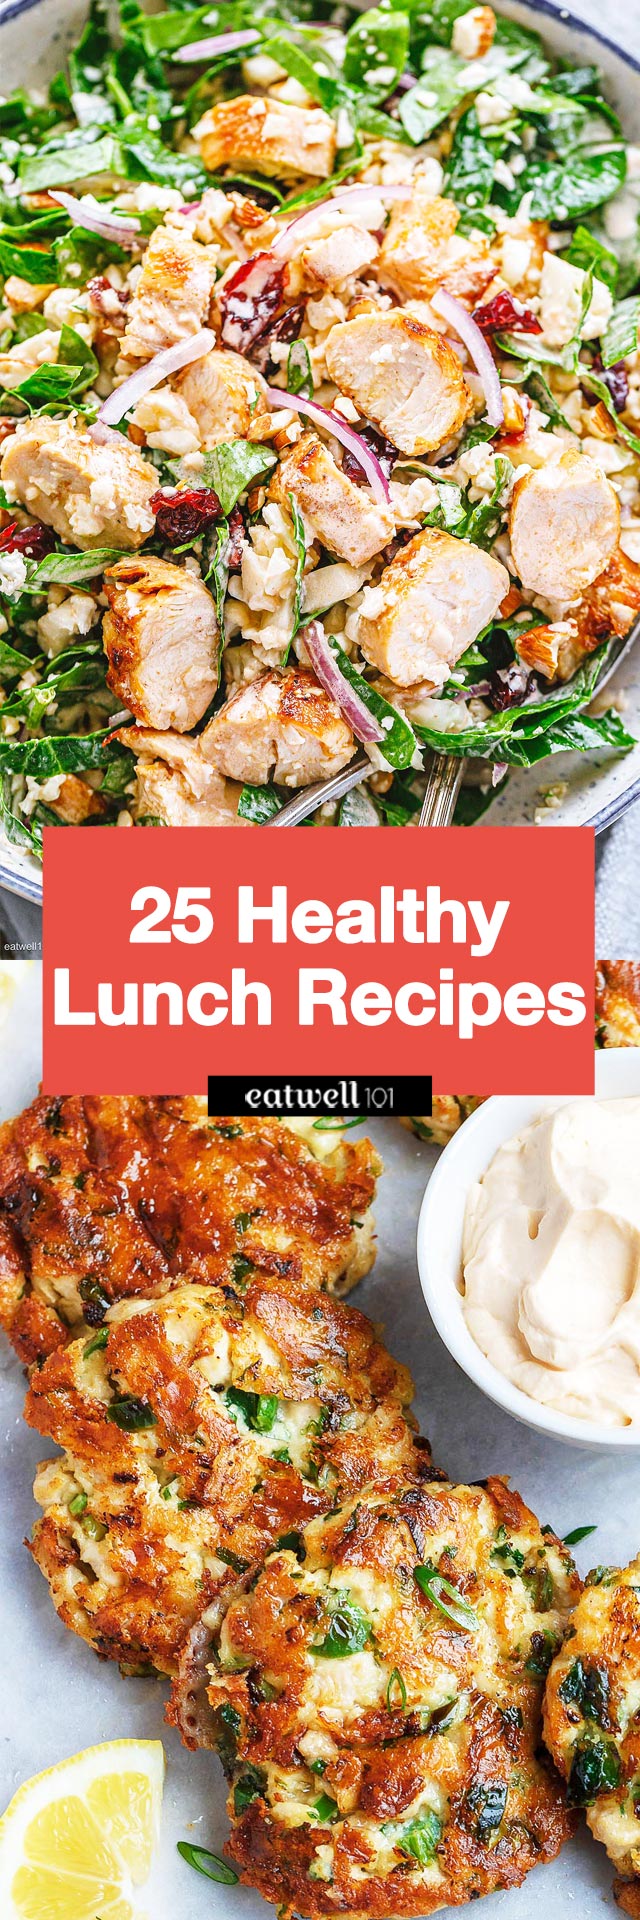 Healthy Lunch Recipes: 25 Easy Healthier Meal Ideas for Lunch - 
#lunch #recipes #eatwell101 -  These healthy lunch recipes are delicious, satisfying, and portable. Enjoy!